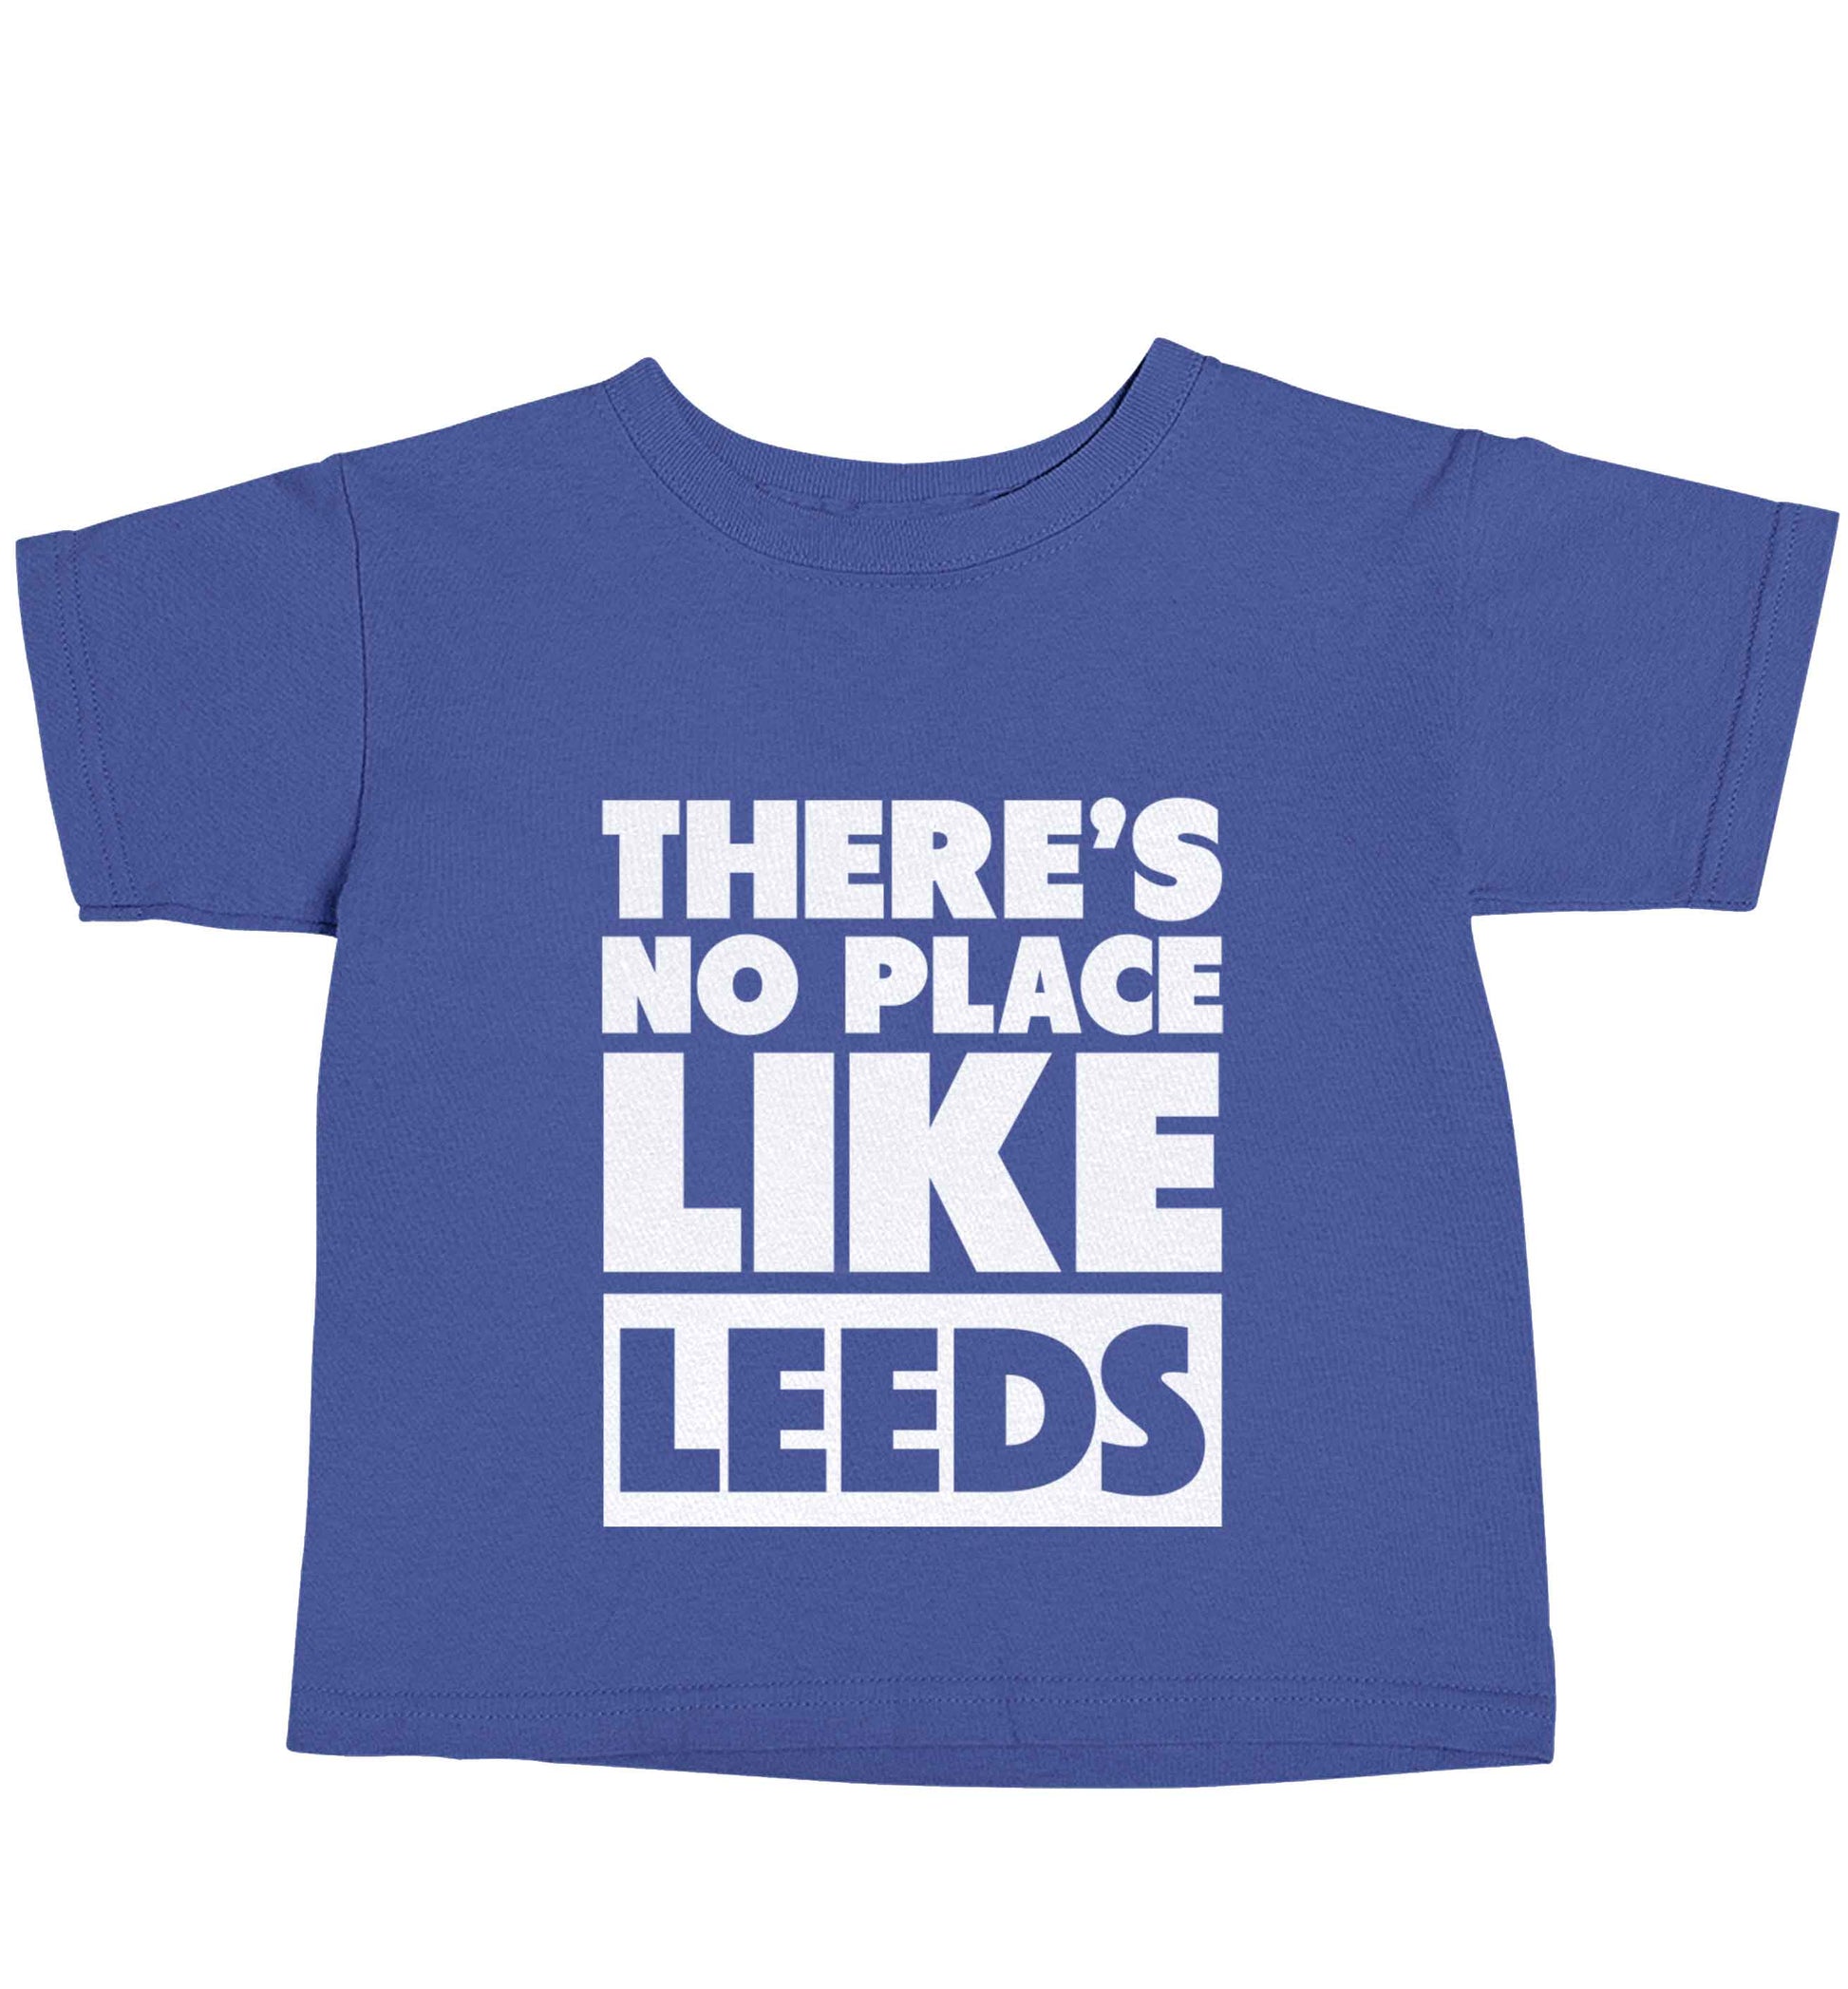 There's no place like Leeds blue baby toddler Tshirt 2 Years